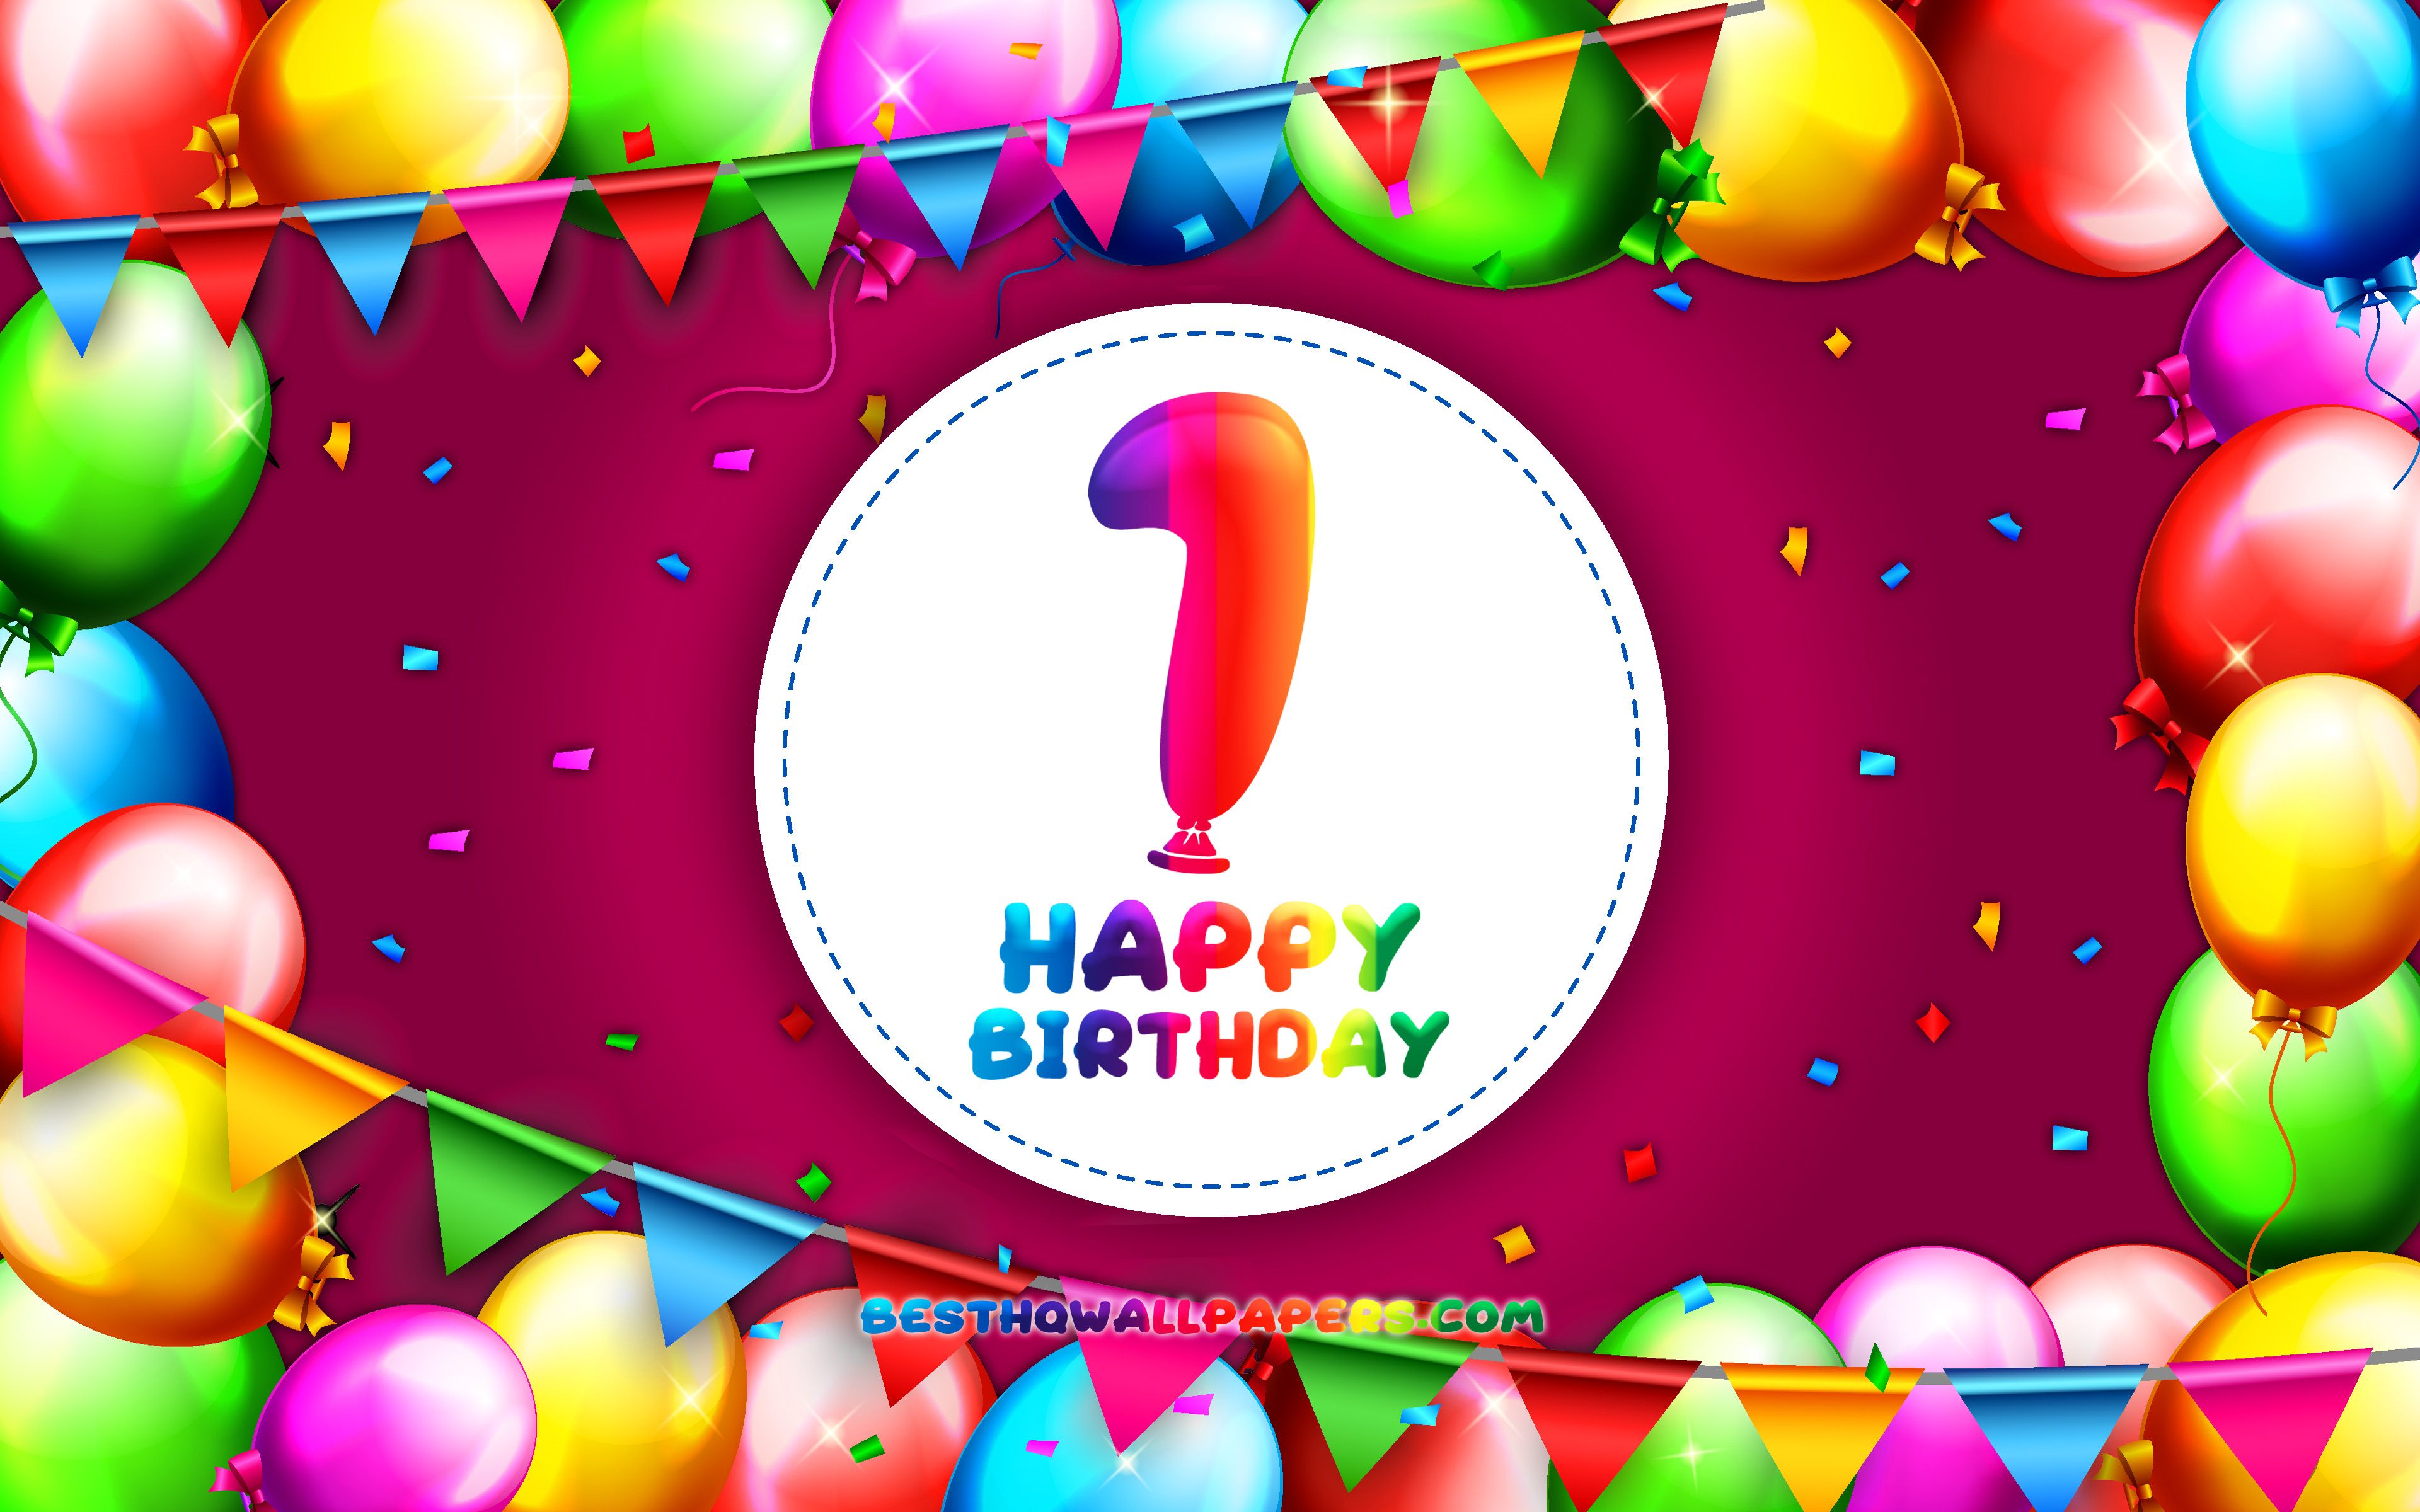 Download wallpaper Happy 1st birthday, 4k, colorful balloon frame